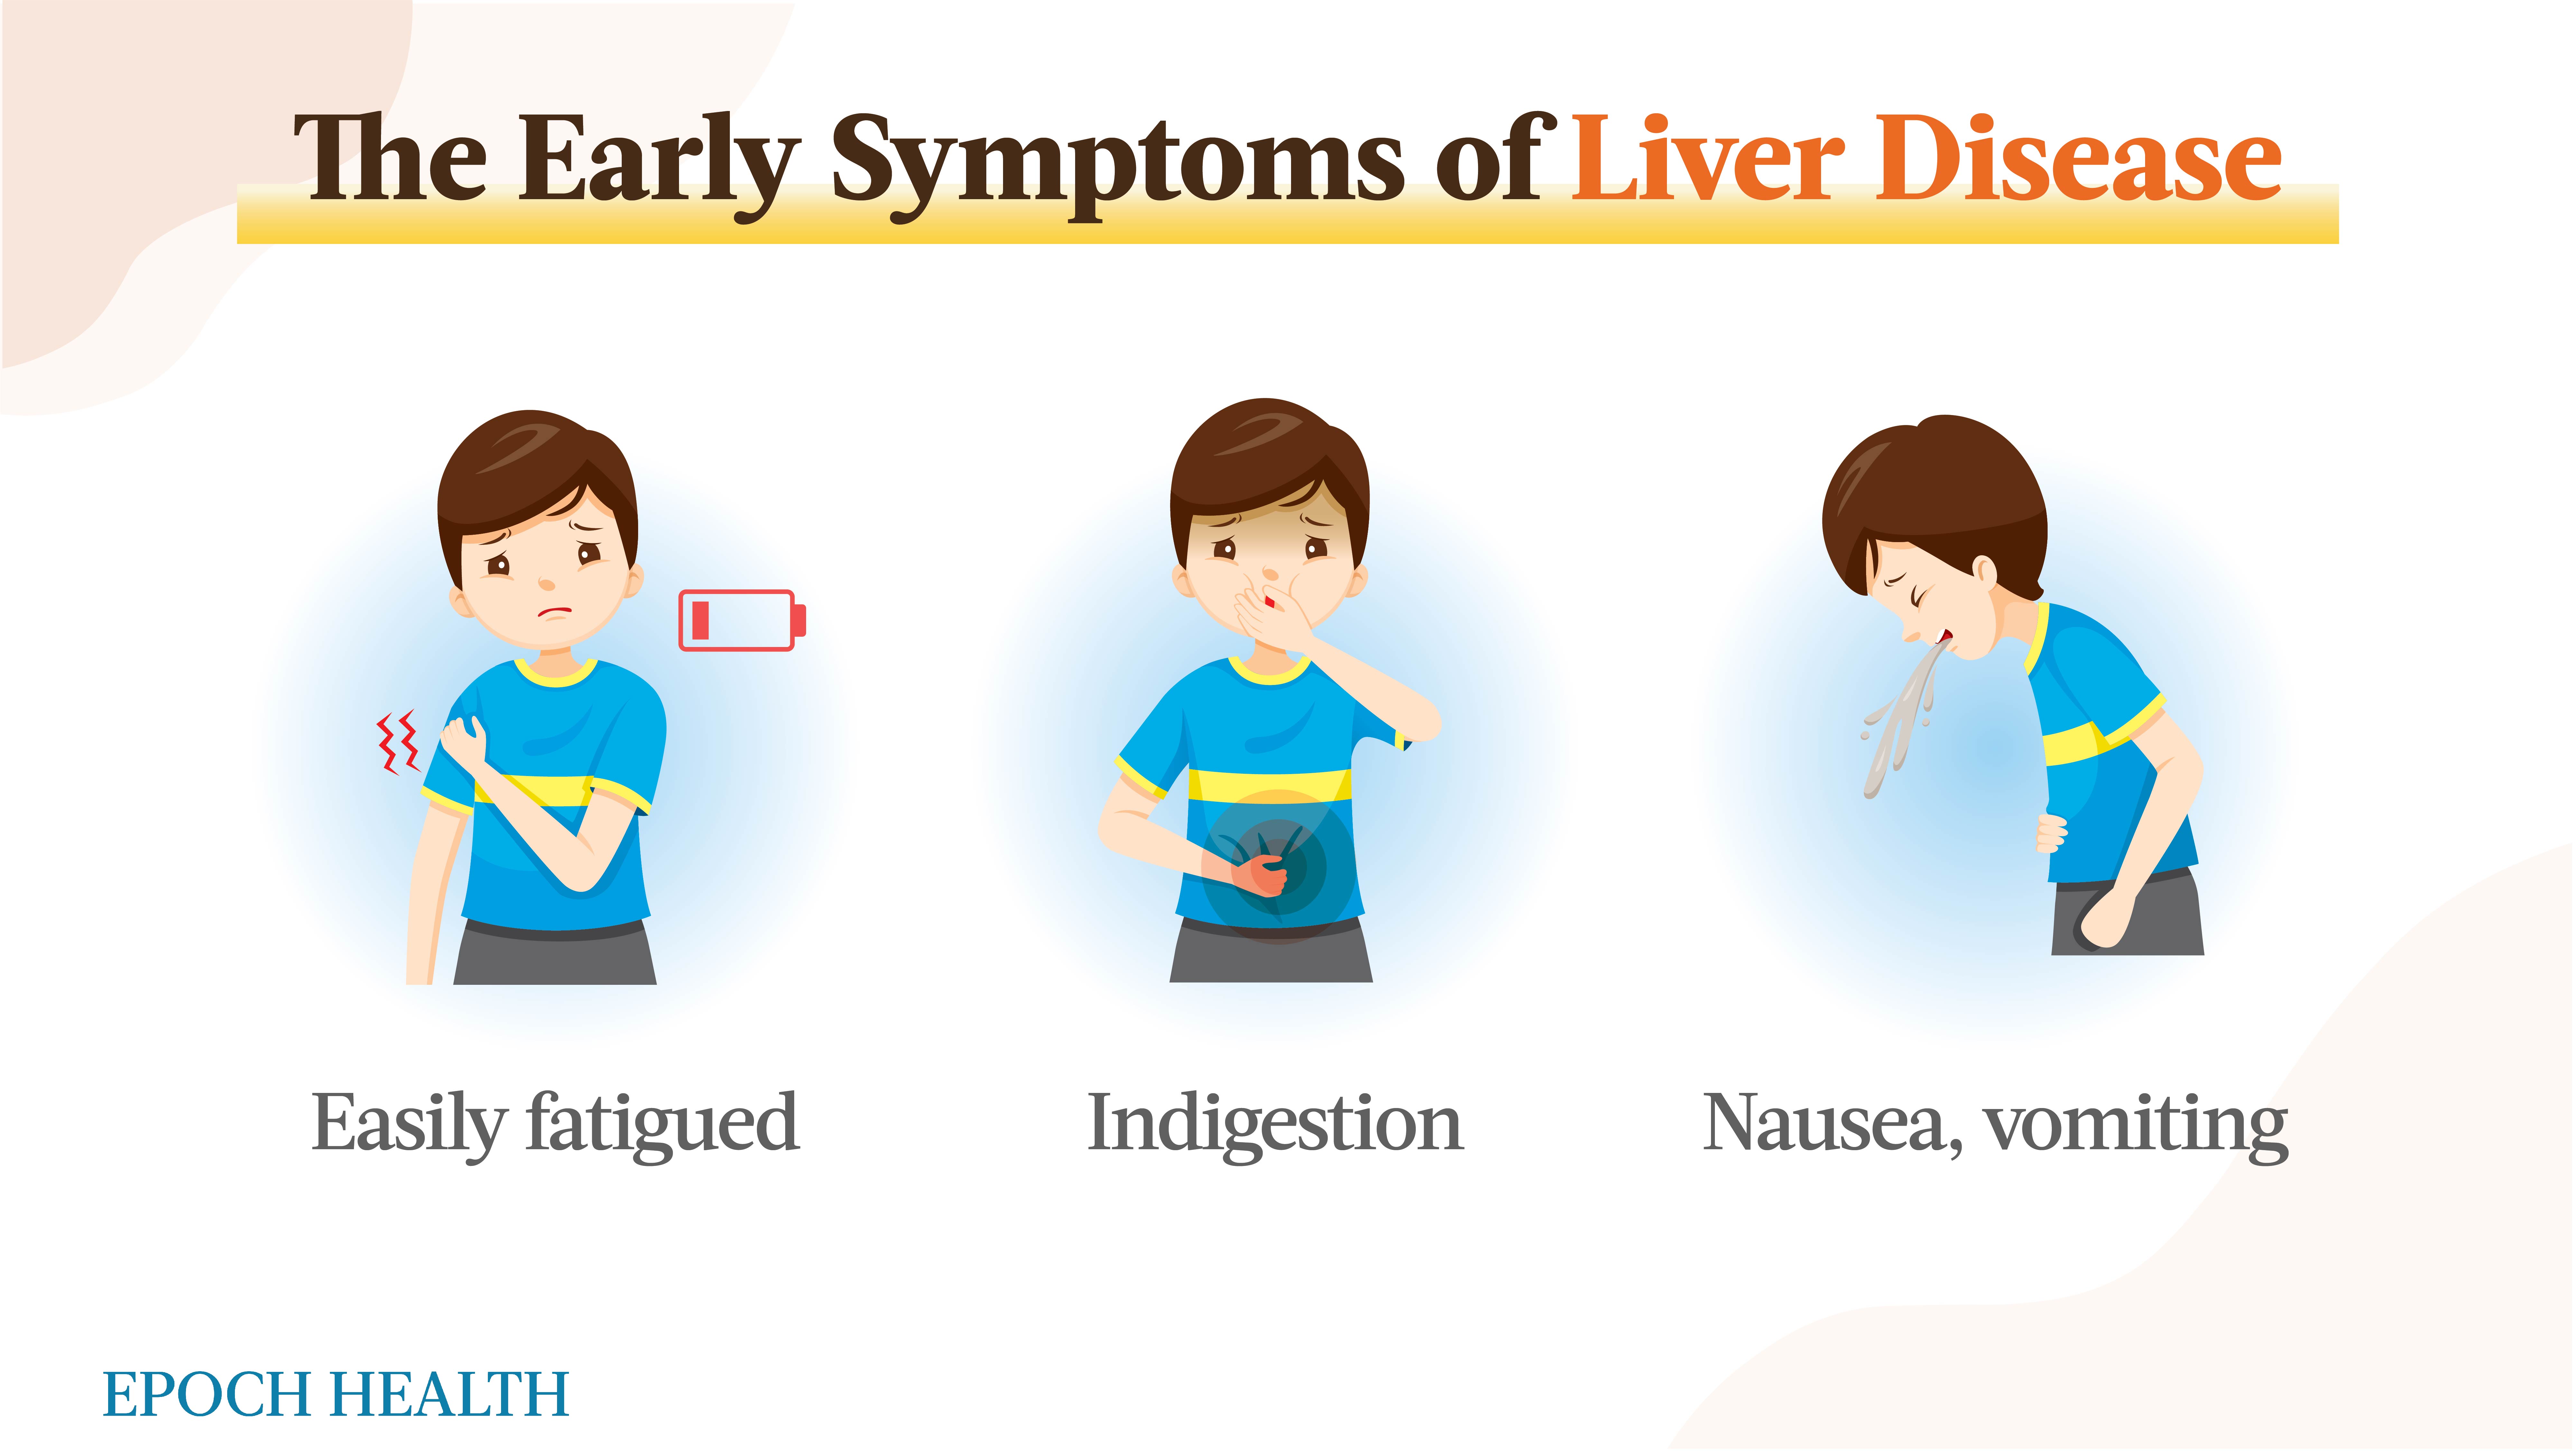 The liver is a busy organ, as described in traditional Chinese medicine, where it is believed that 'the liver is the root of fatigue.' (The Epoch Times)